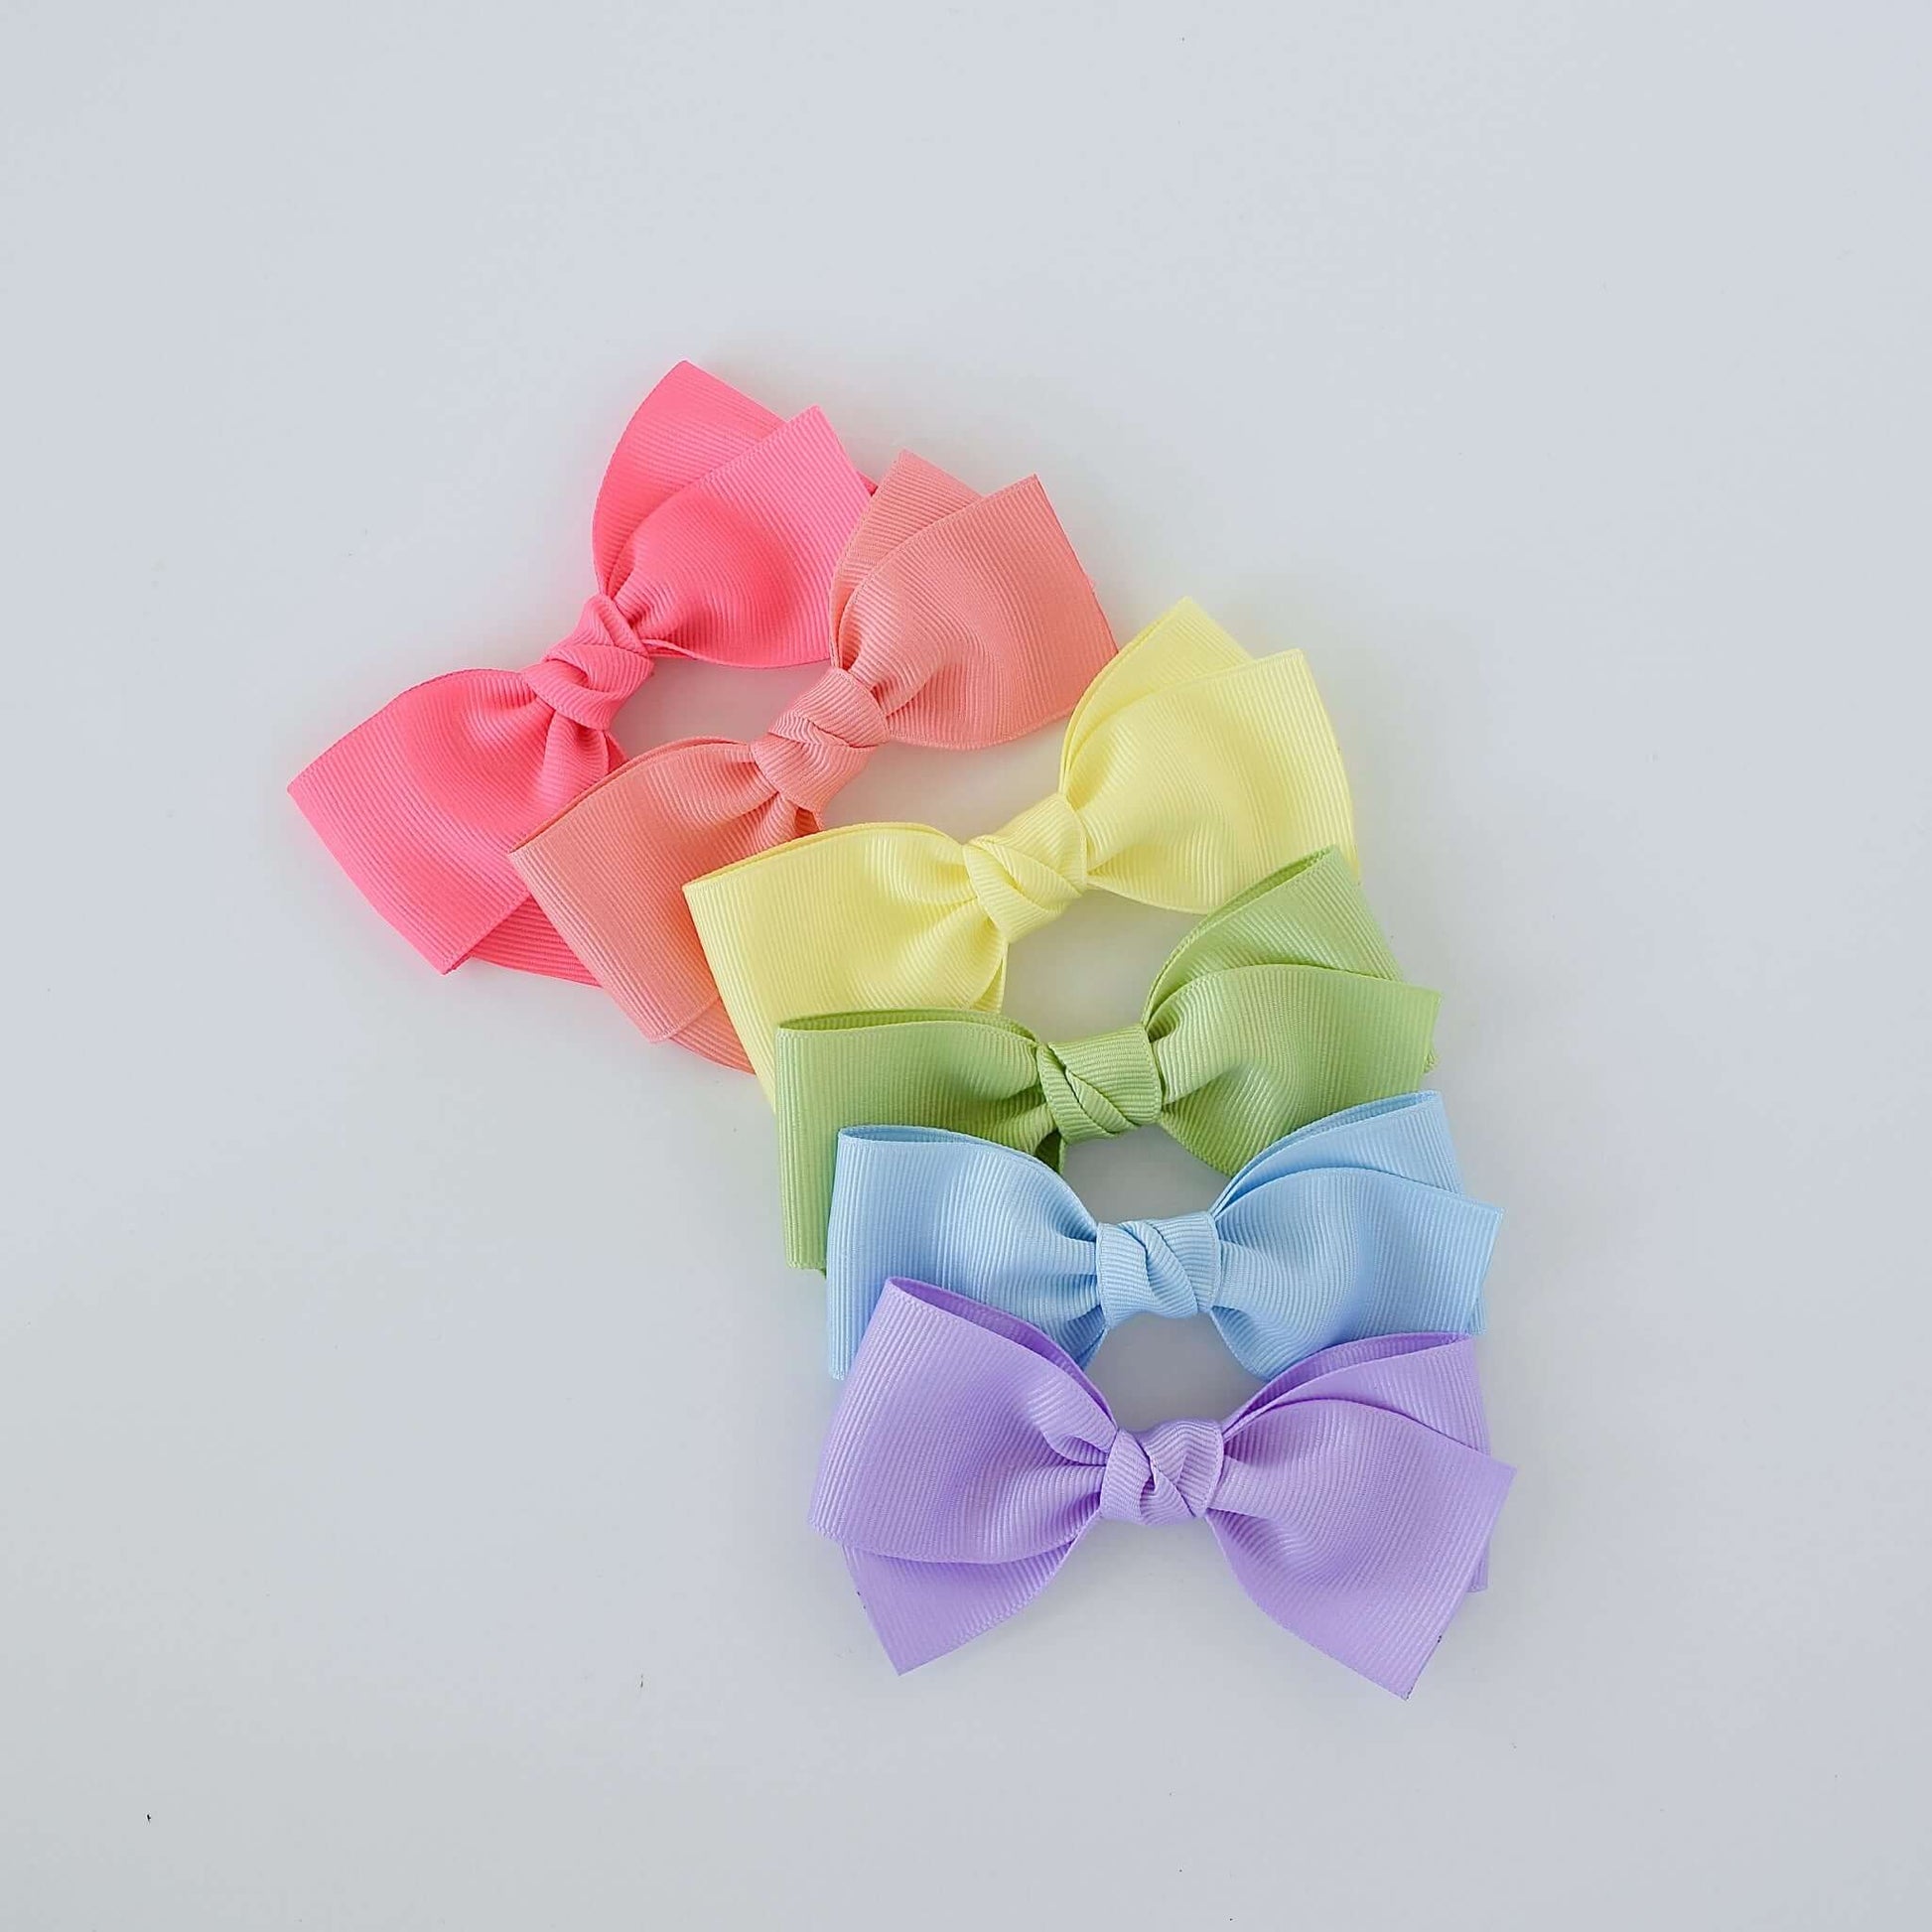 4 inch grosgrain baby Kayla bow clips in pastel colors including pink, peach, yellow, green, blue, and purple, perfect for toddlers and newborns.